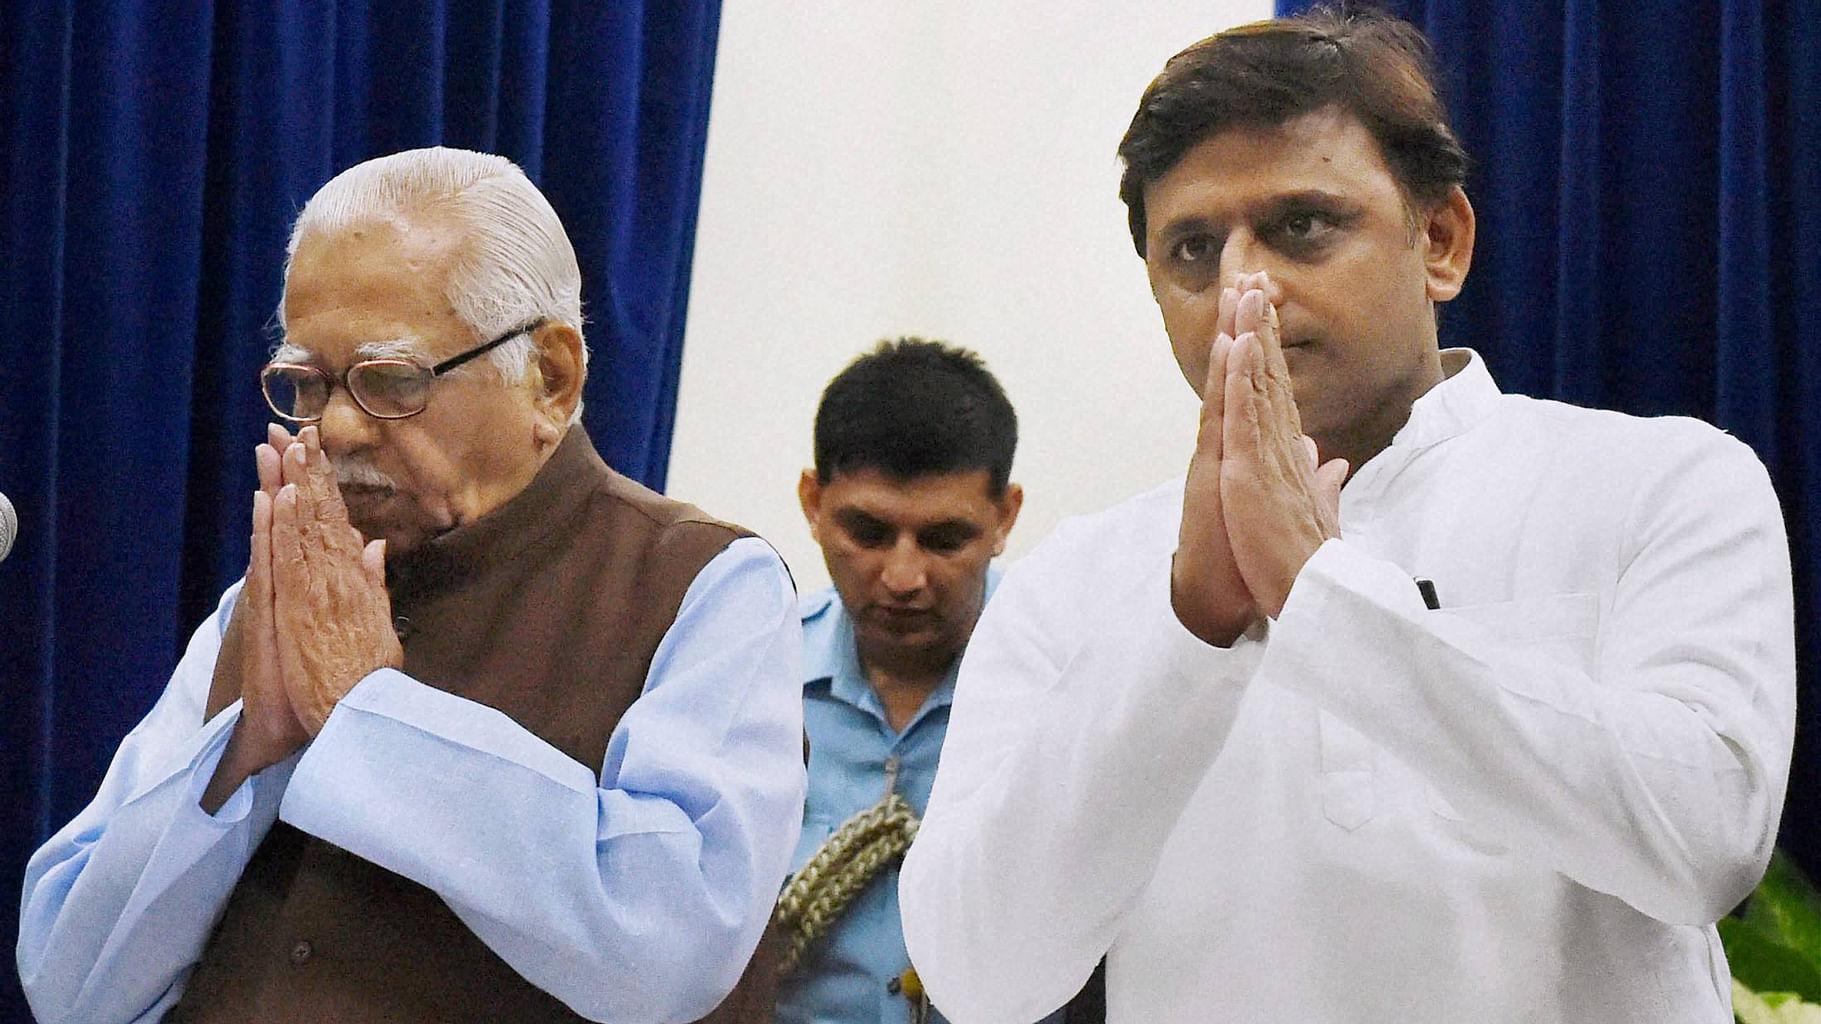 Uttar Pradesh Governor Ram Naik and state Chief Minister Akhilesh Yadav during the swearing in ceremony at Rajbhawan, in Lucknow on Monday. (Photo Courtesy: PTI)